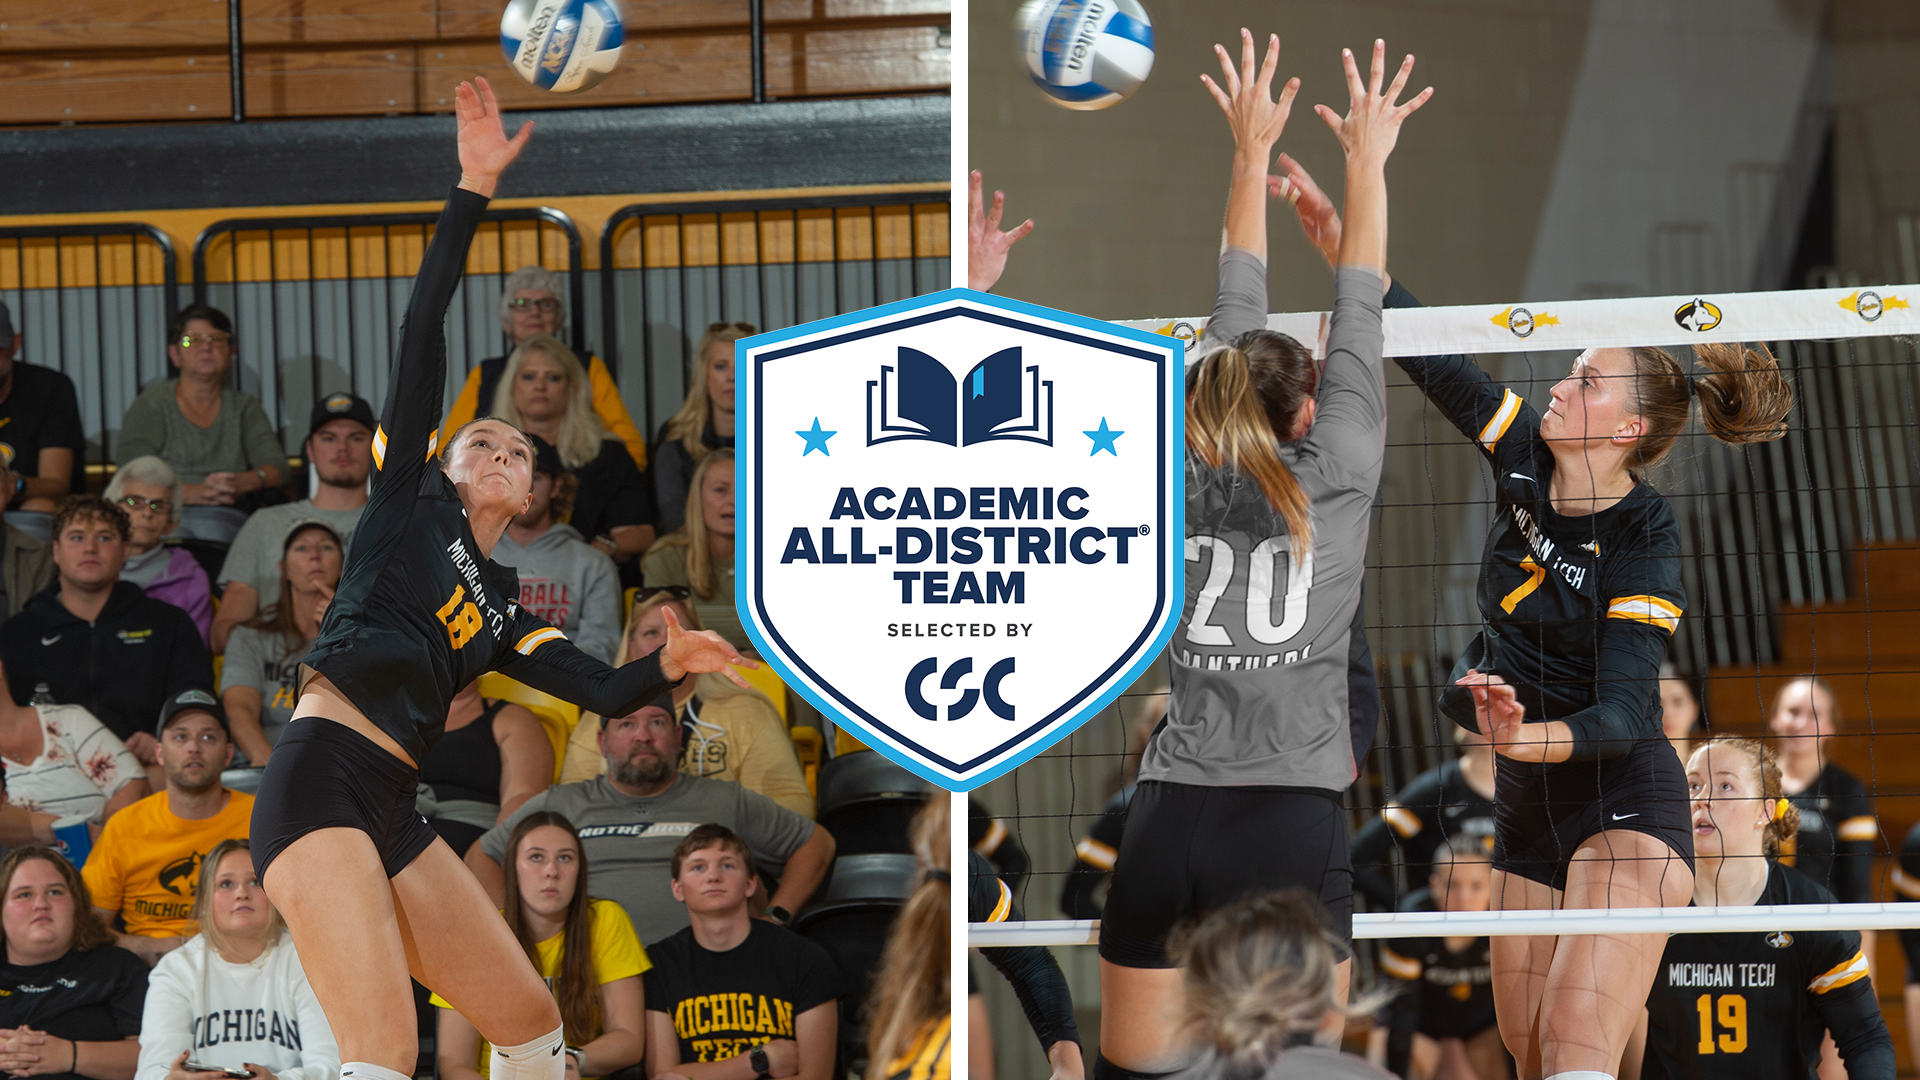 Meiners and Oujiri Named Academic All-District